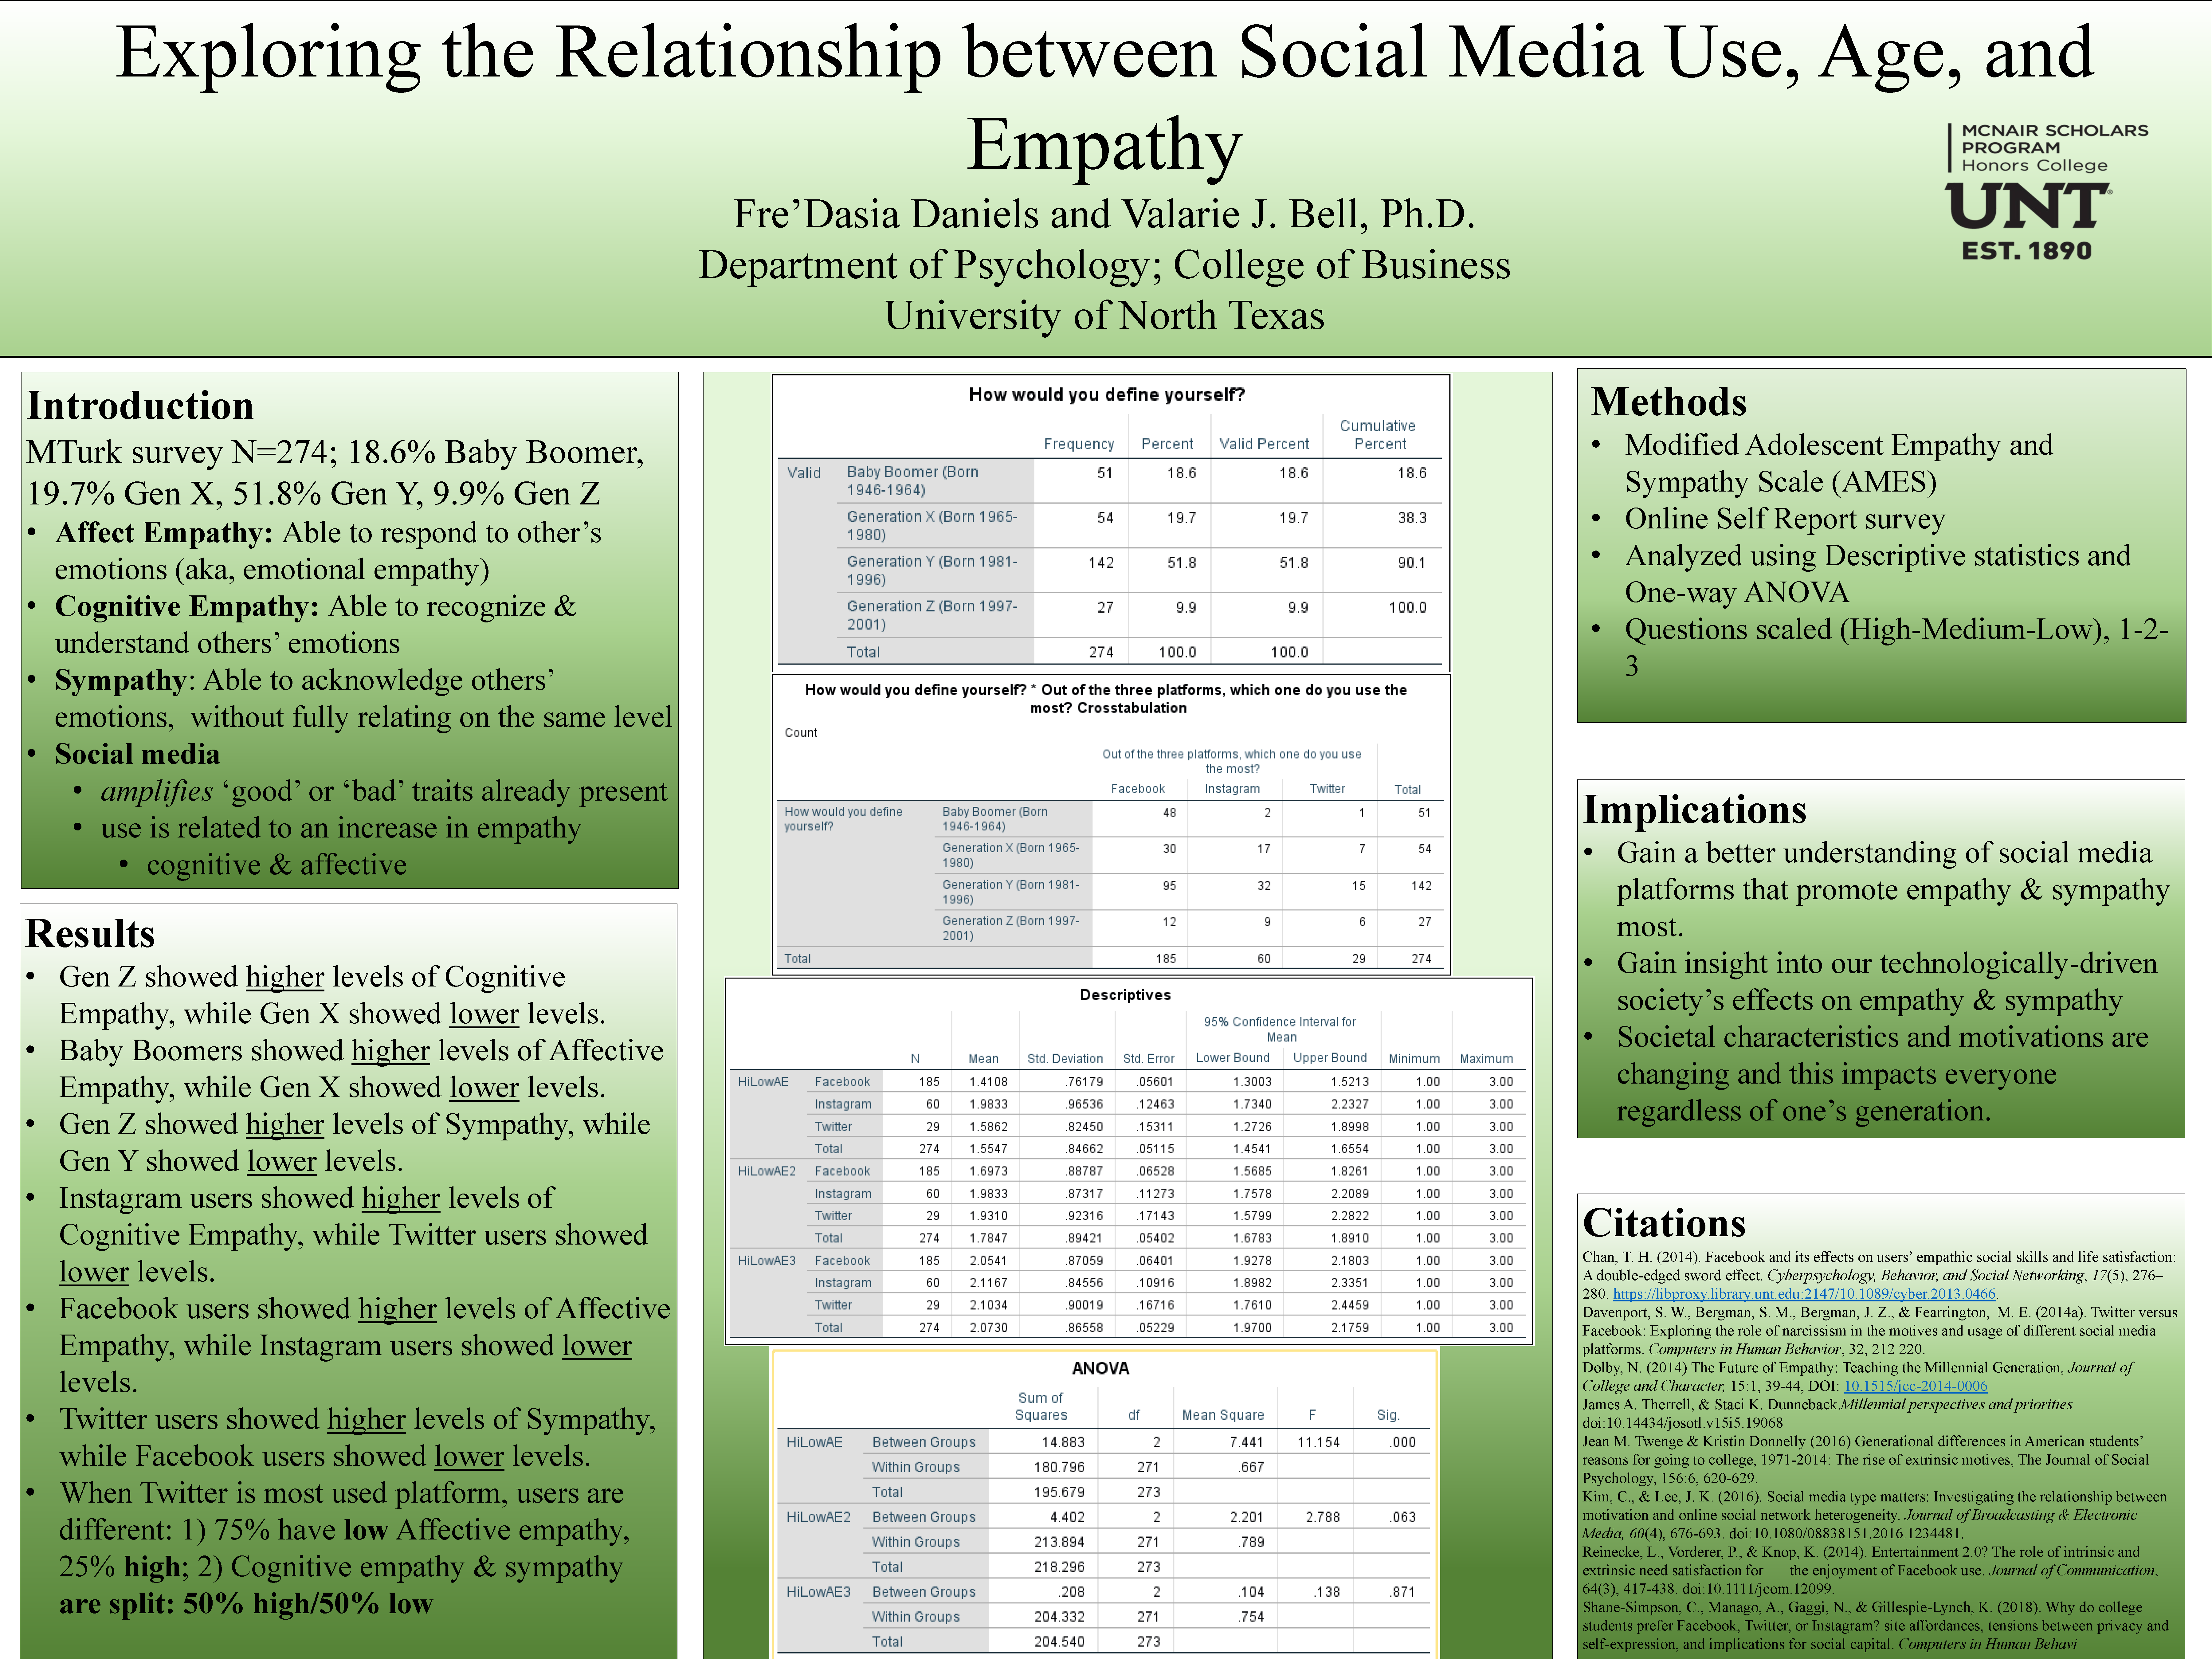 Exploring the Relationship between Social Media Use, Age, and Empathy